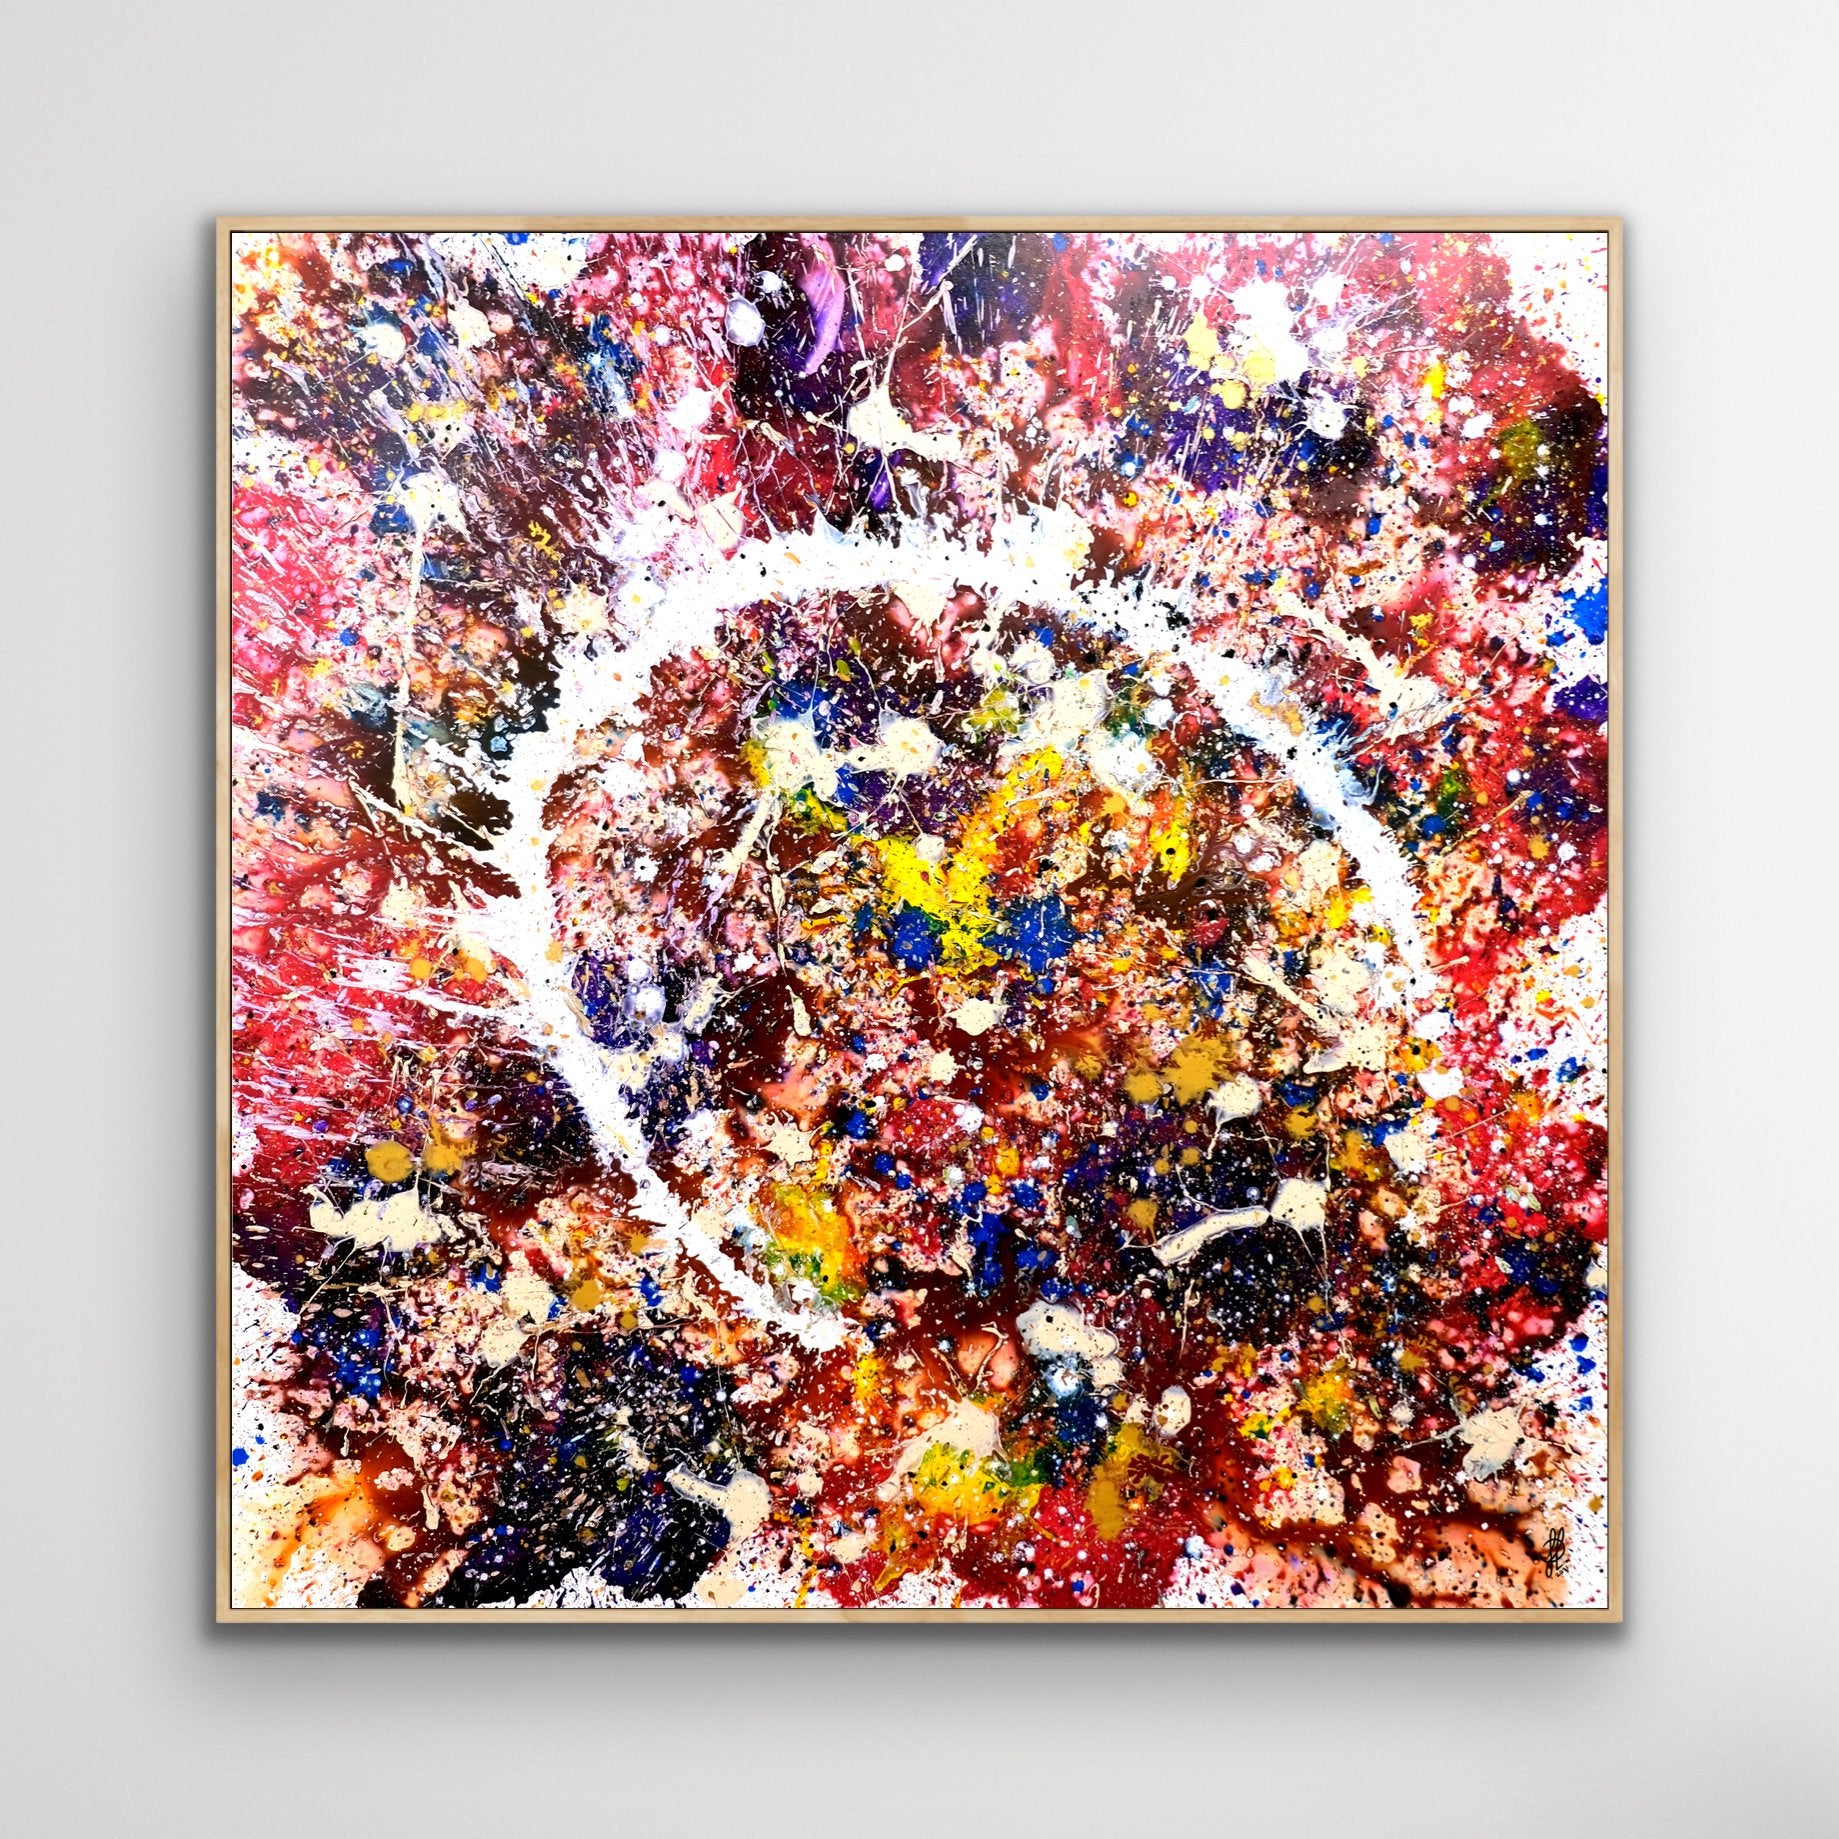 Canvas print: "Chaos In My Mind"